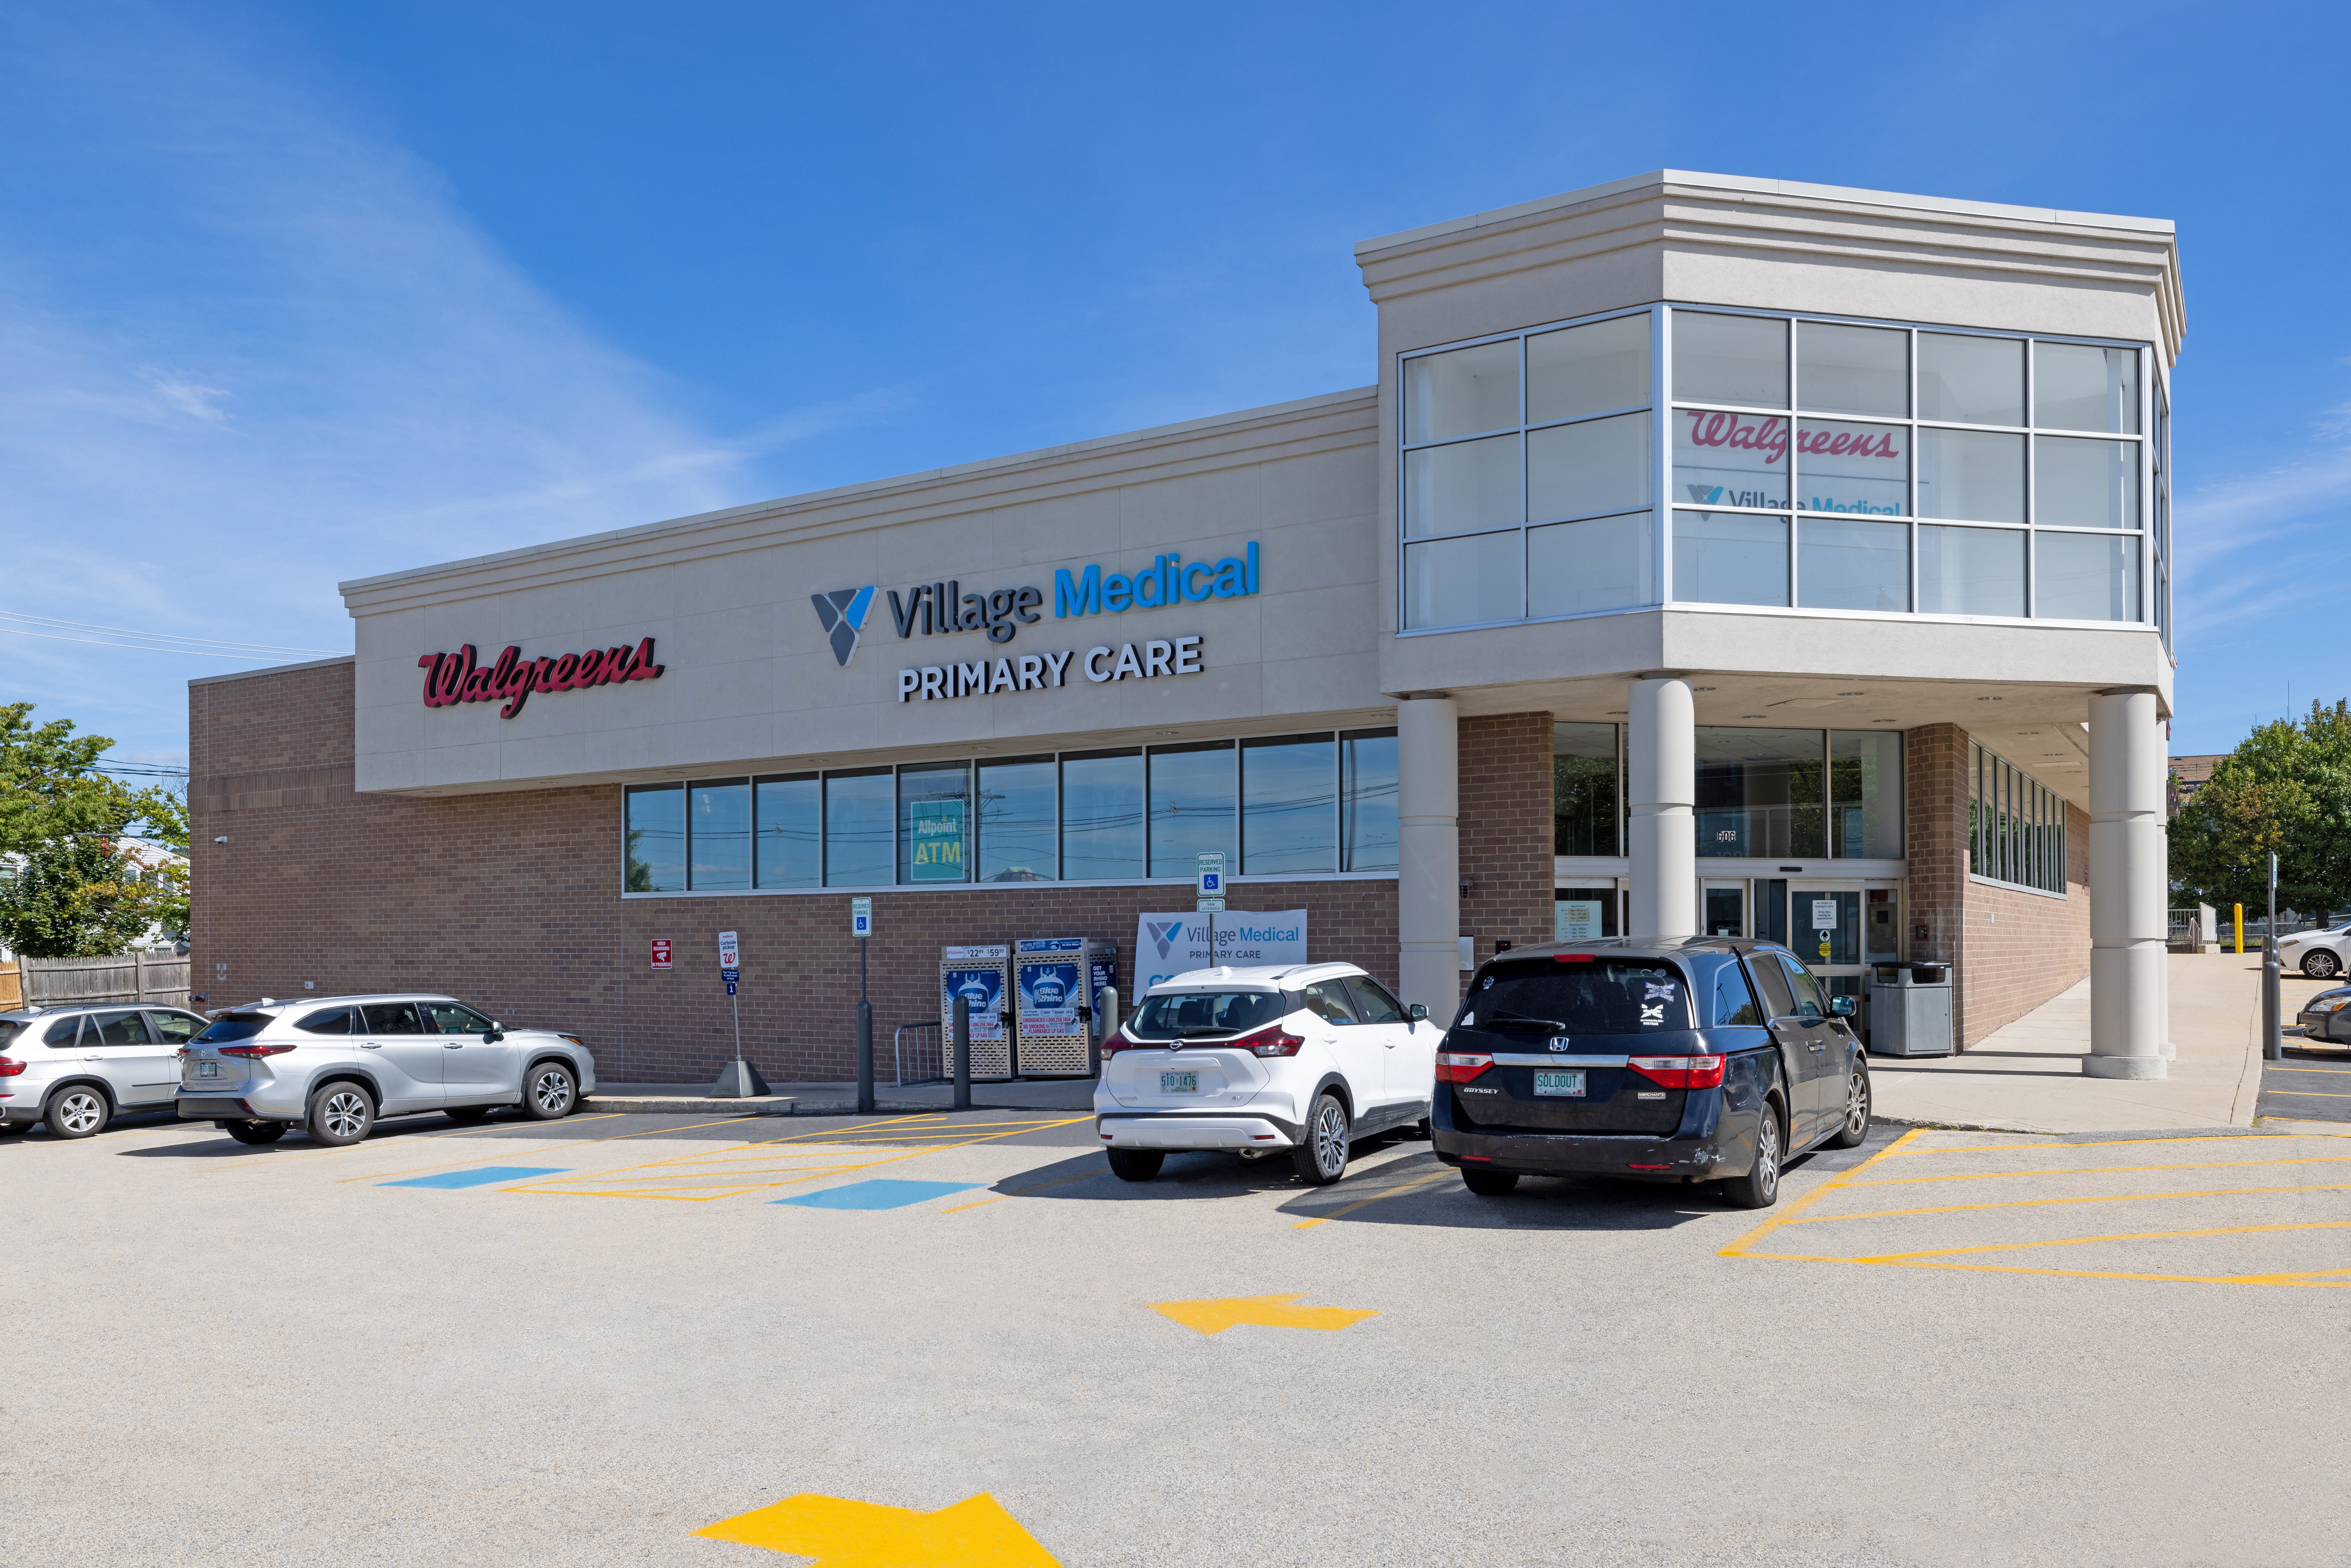 Village Medical at Walgreens - 606 Valley Street Suite 100 Manchester, NH 03103